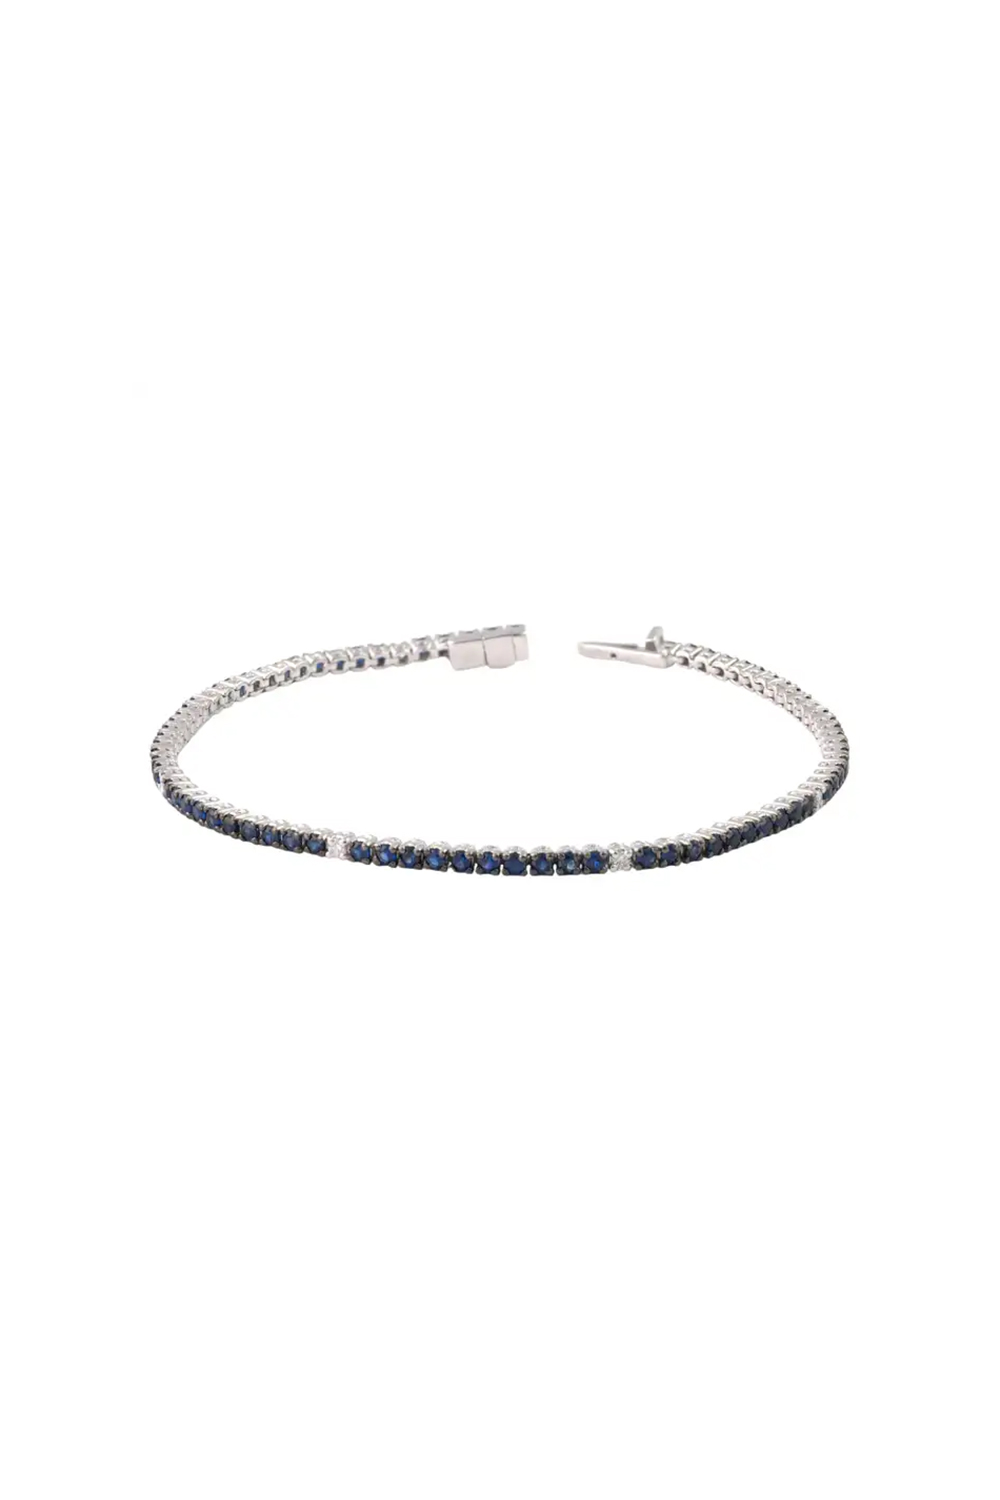 Natural Blue Sapphire 2.41cts & Diamond 0.15cts in 18k Gold 6.67 gms Tennis Bracelet